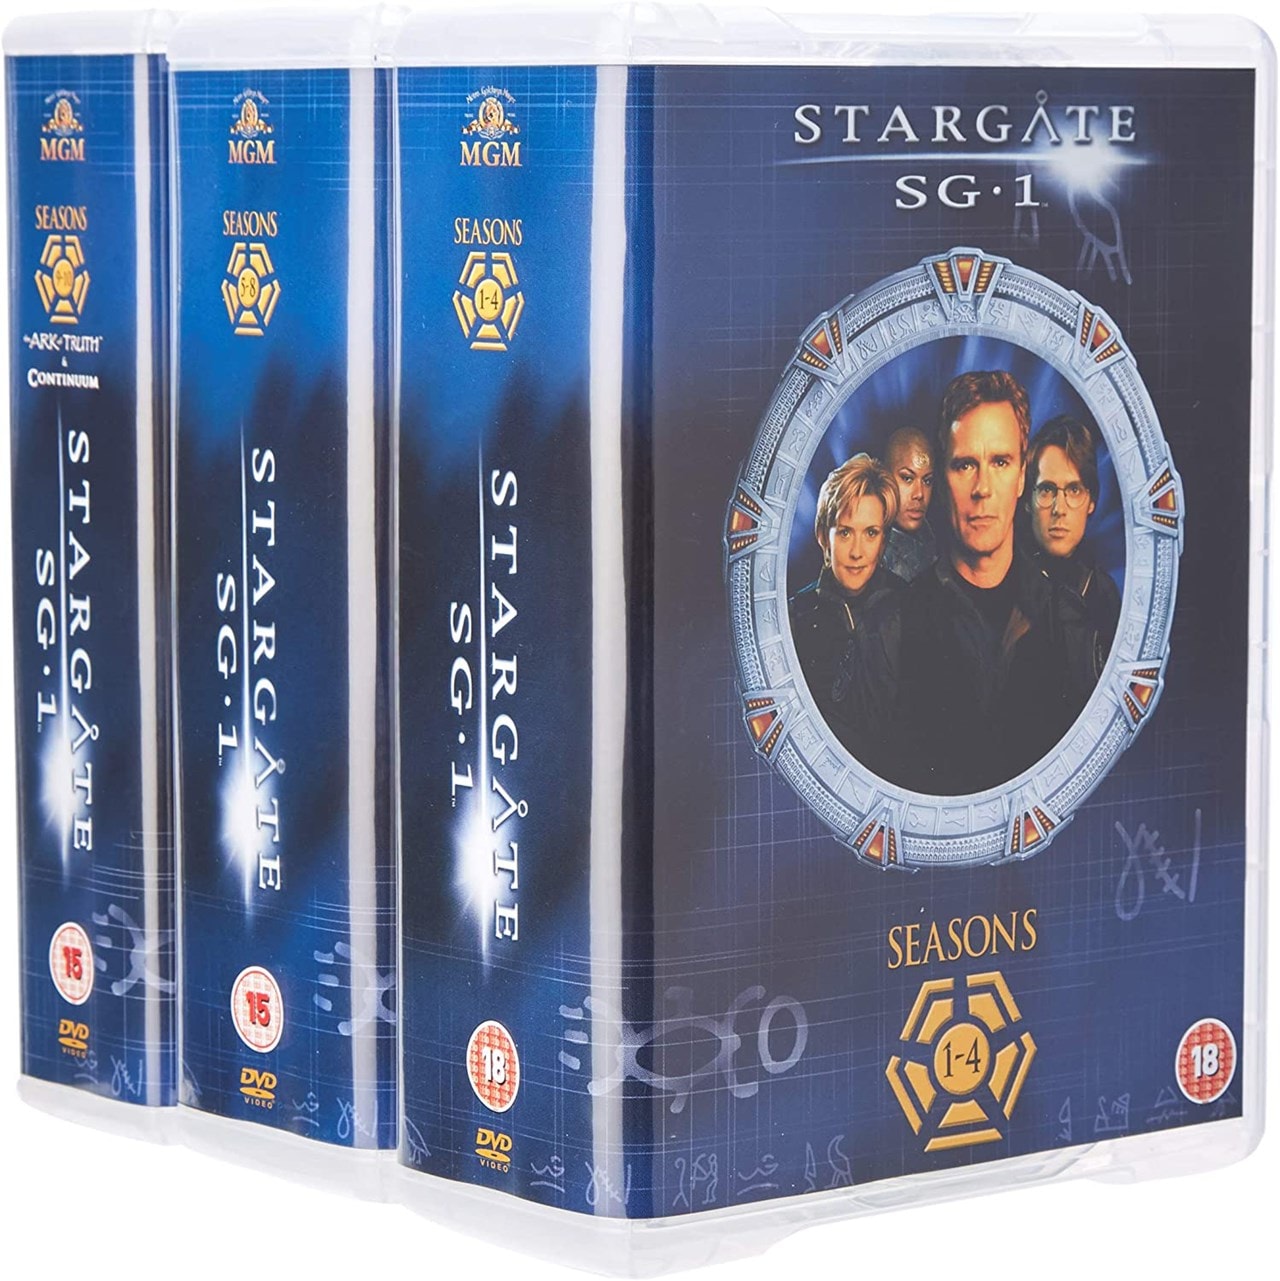 Stargate Sg1 The Complete Series Dvd Box Set Free Shipping Over Hmv Store